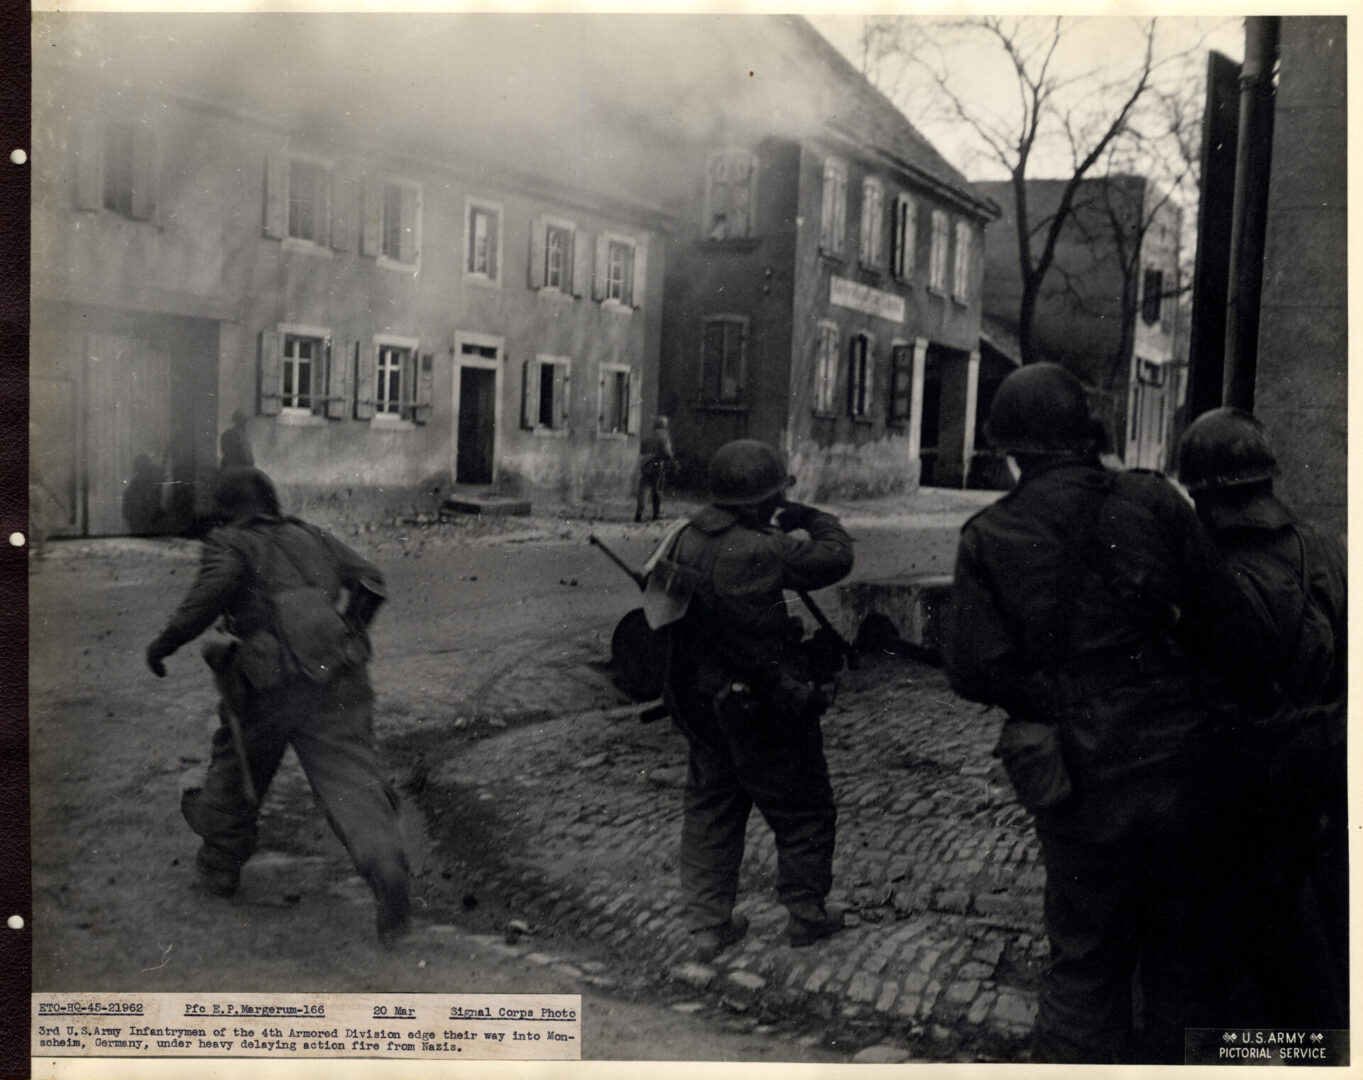 U.S. infantrymen face delaying action fire by Nazis